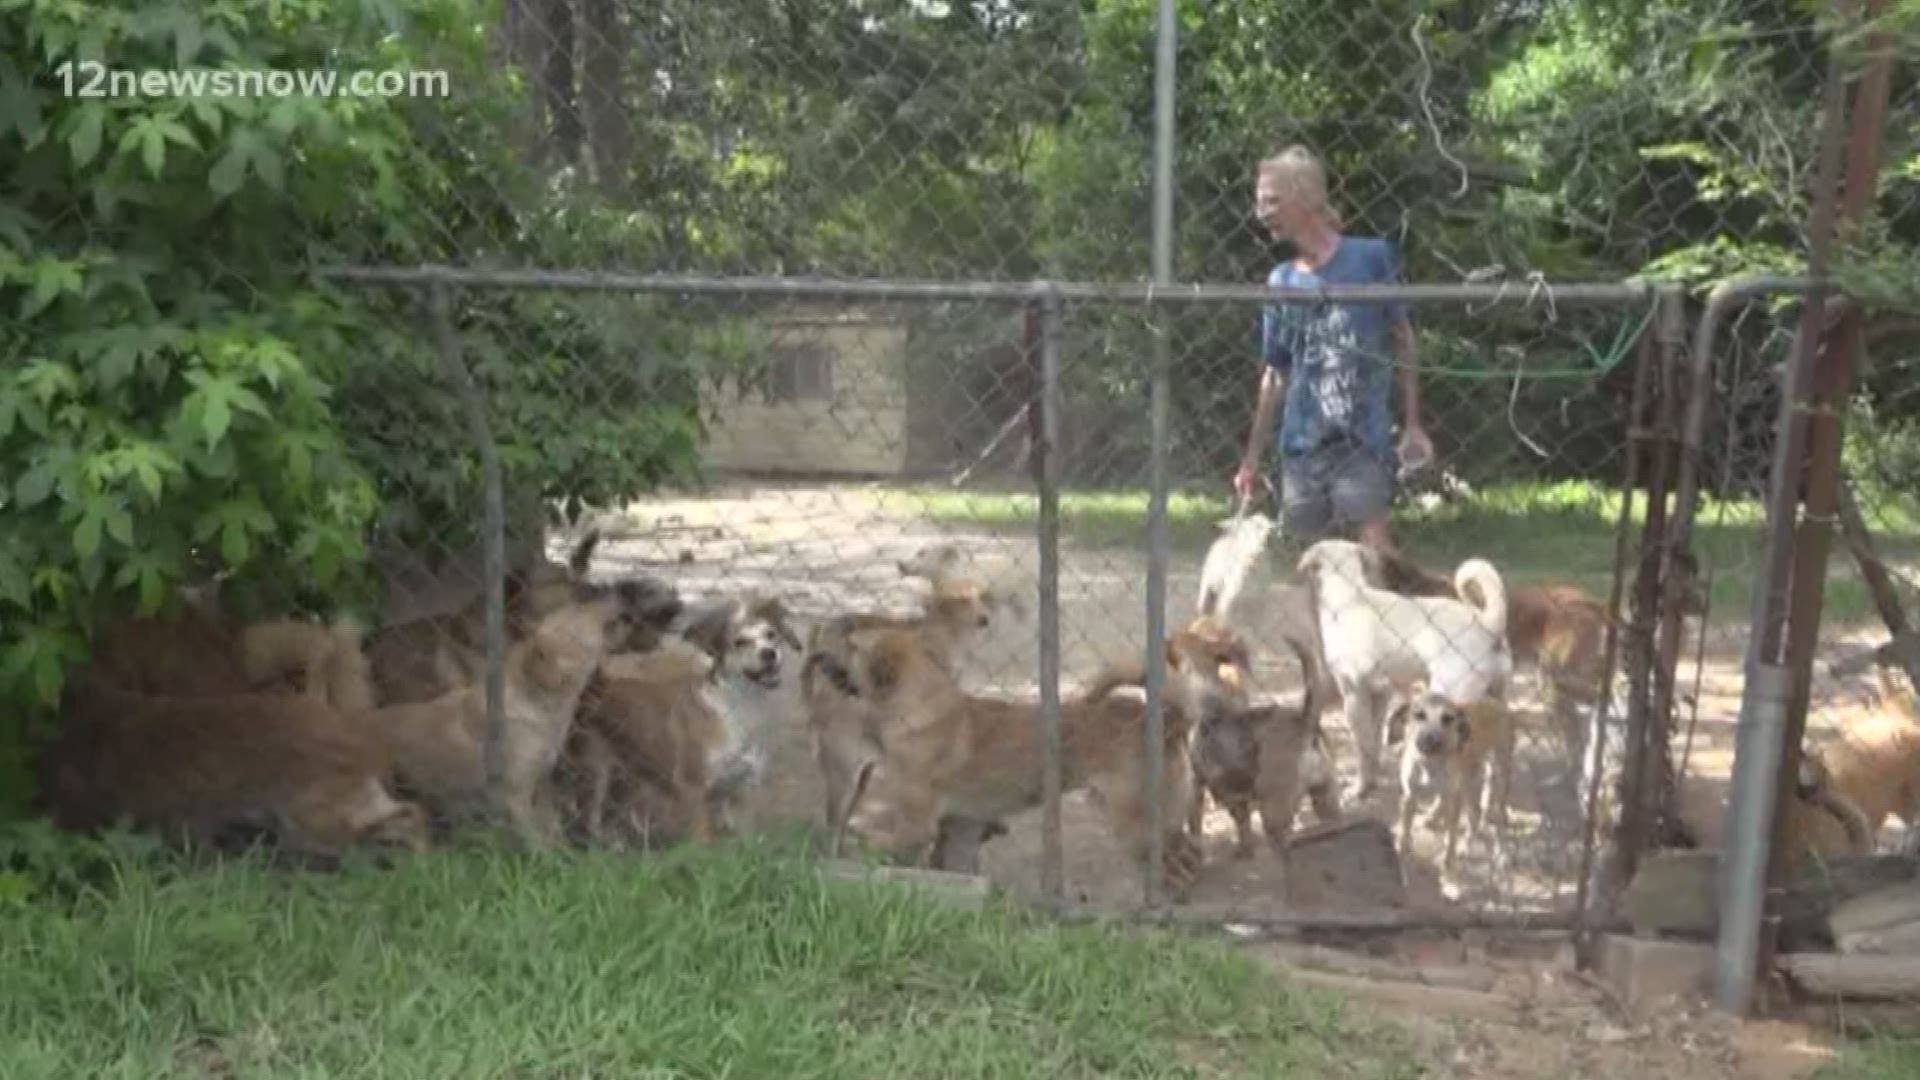 A pack of dogs outside a home in Ivanhoe is breeding concerns among some homeowners. Michael Gray says he has been taking in stray dogs for years, and he now has roughly 50. The city of Ivanhoe has even reached out to try to help by contacting a number of organizations, but so far none have stepped up. Gray applauds their efforts, but says he's most upset with the Houston SPCA.